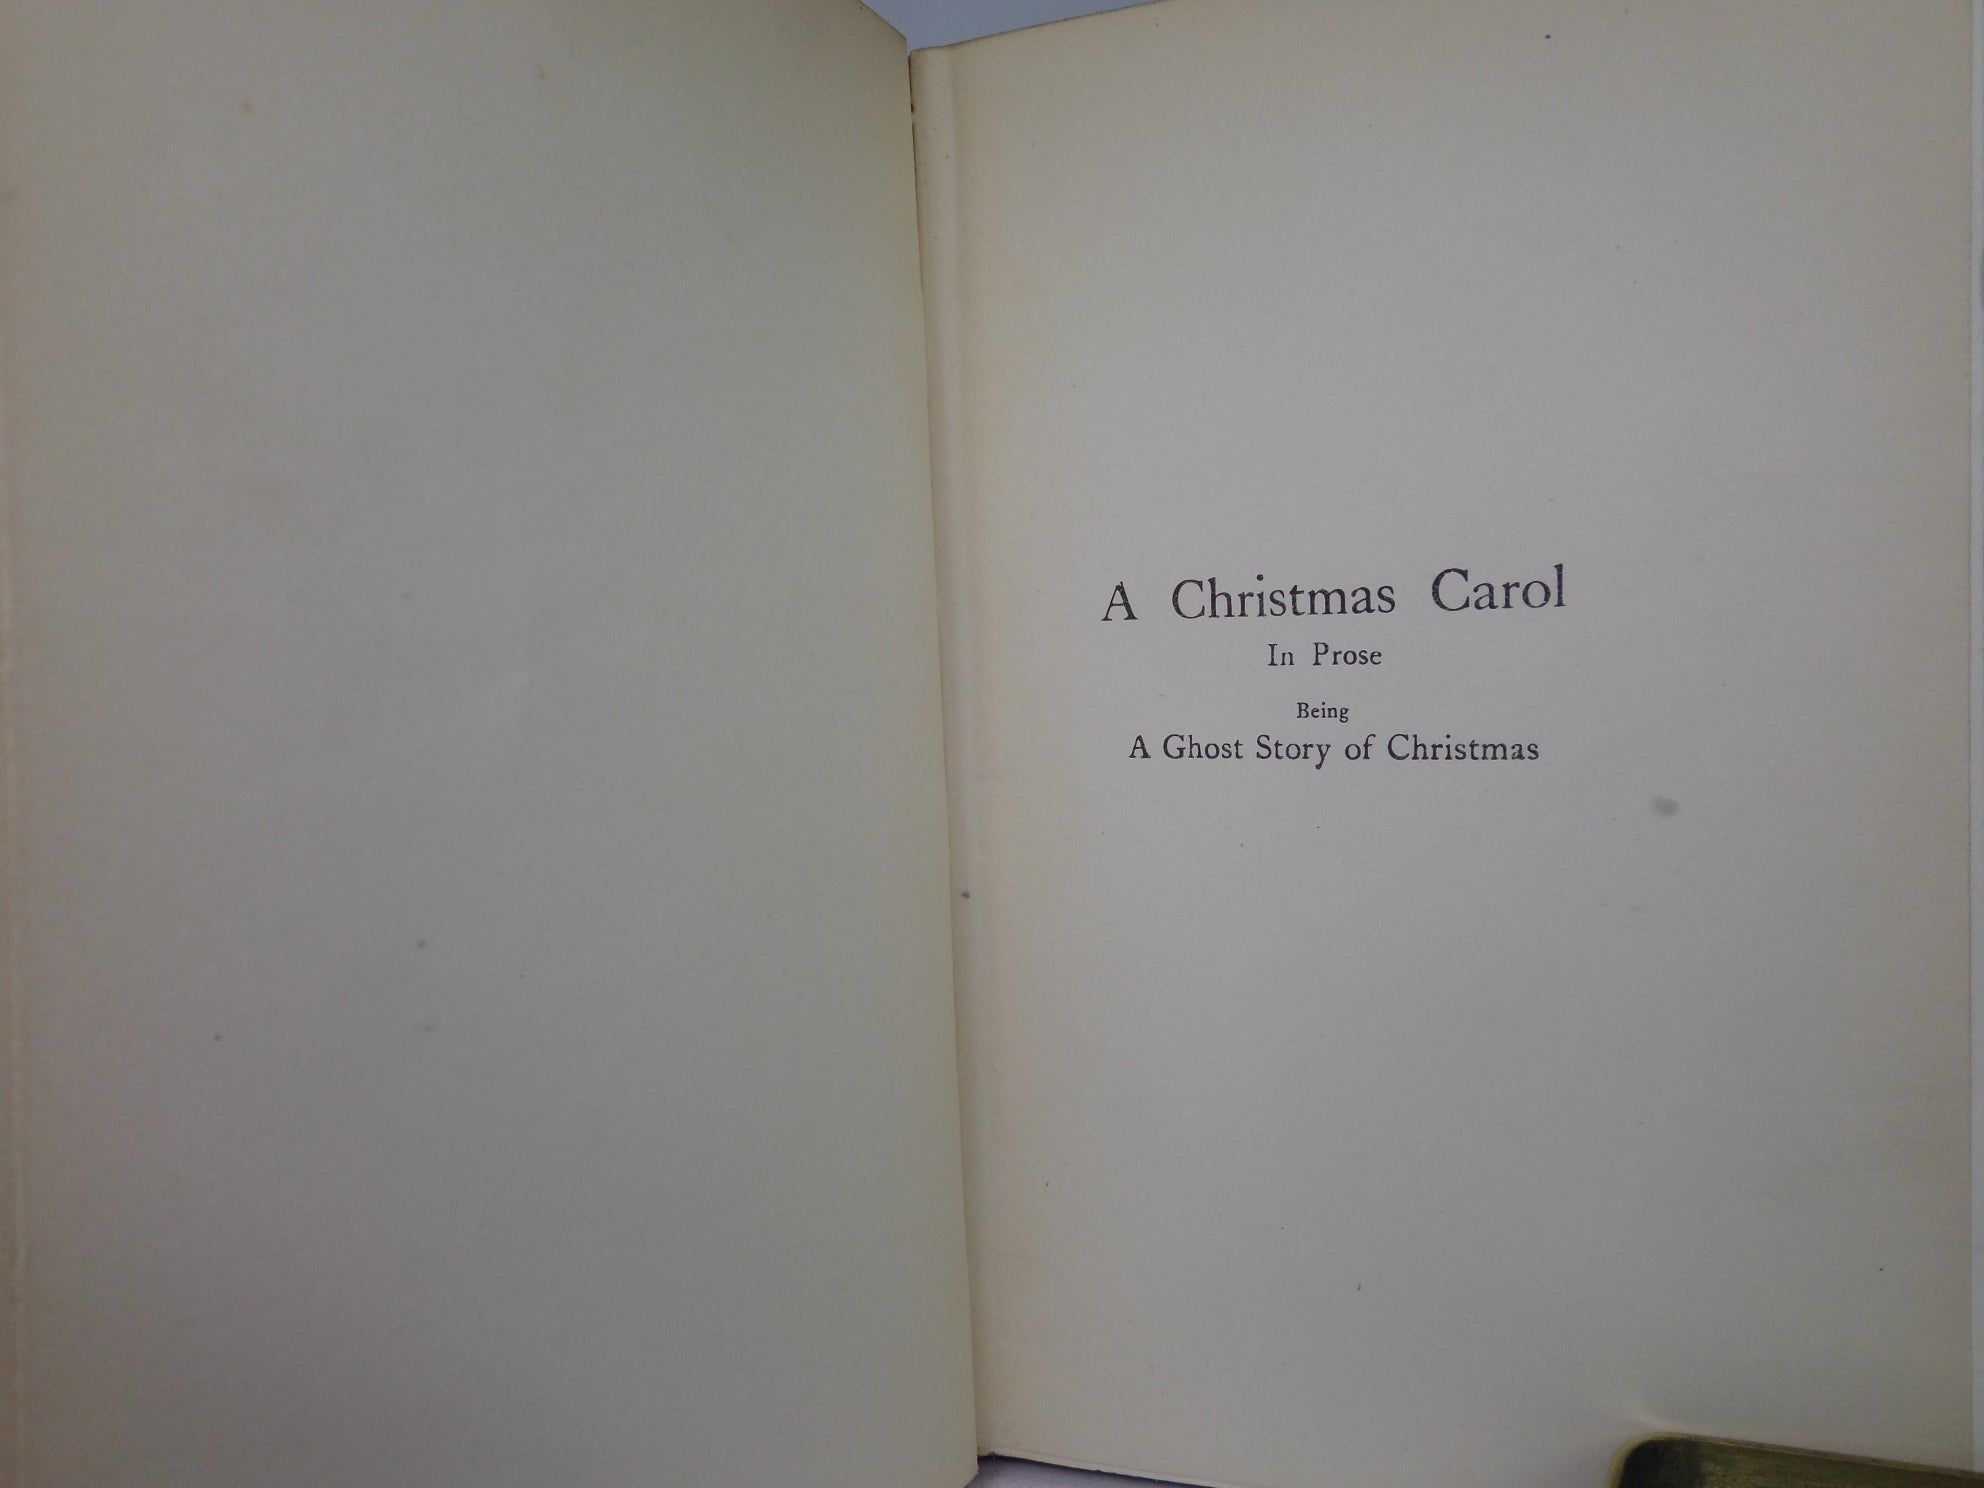 A CHRISTMAS CAROL BY CHARLES DICKENS 1911 DELUXE VELLUM BINDING, C. E. BROCK ILLUSTRATIONS